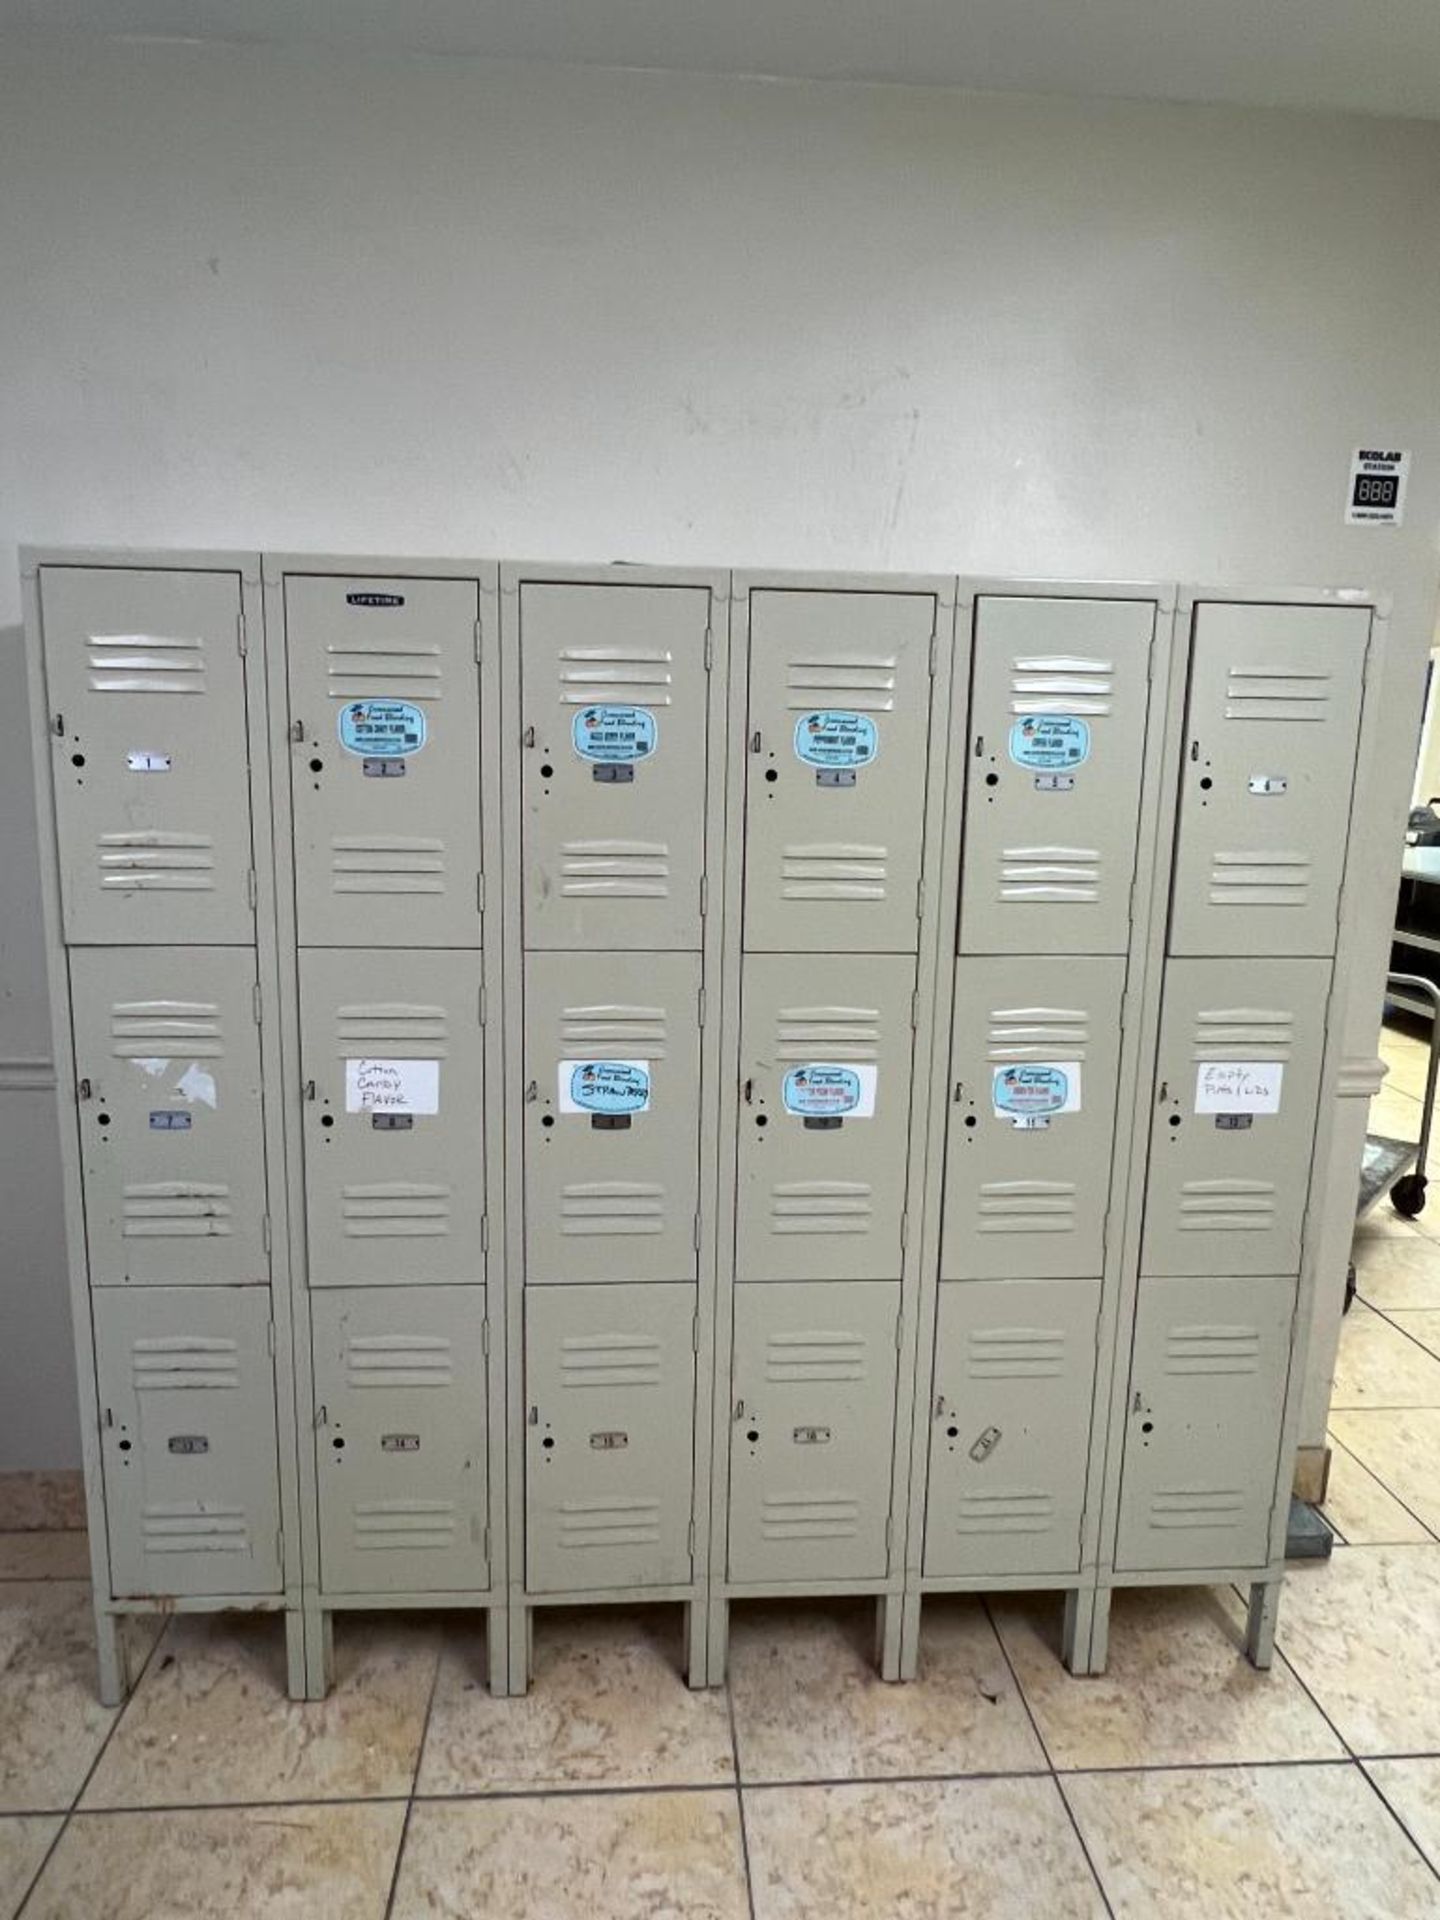 Storage Lockers: 1-36 Bank, Dimensions= 10" x 10" and 1-18 Bank, Dimensions= 10" x 20" - Rigging Fee - Image 2 of 3